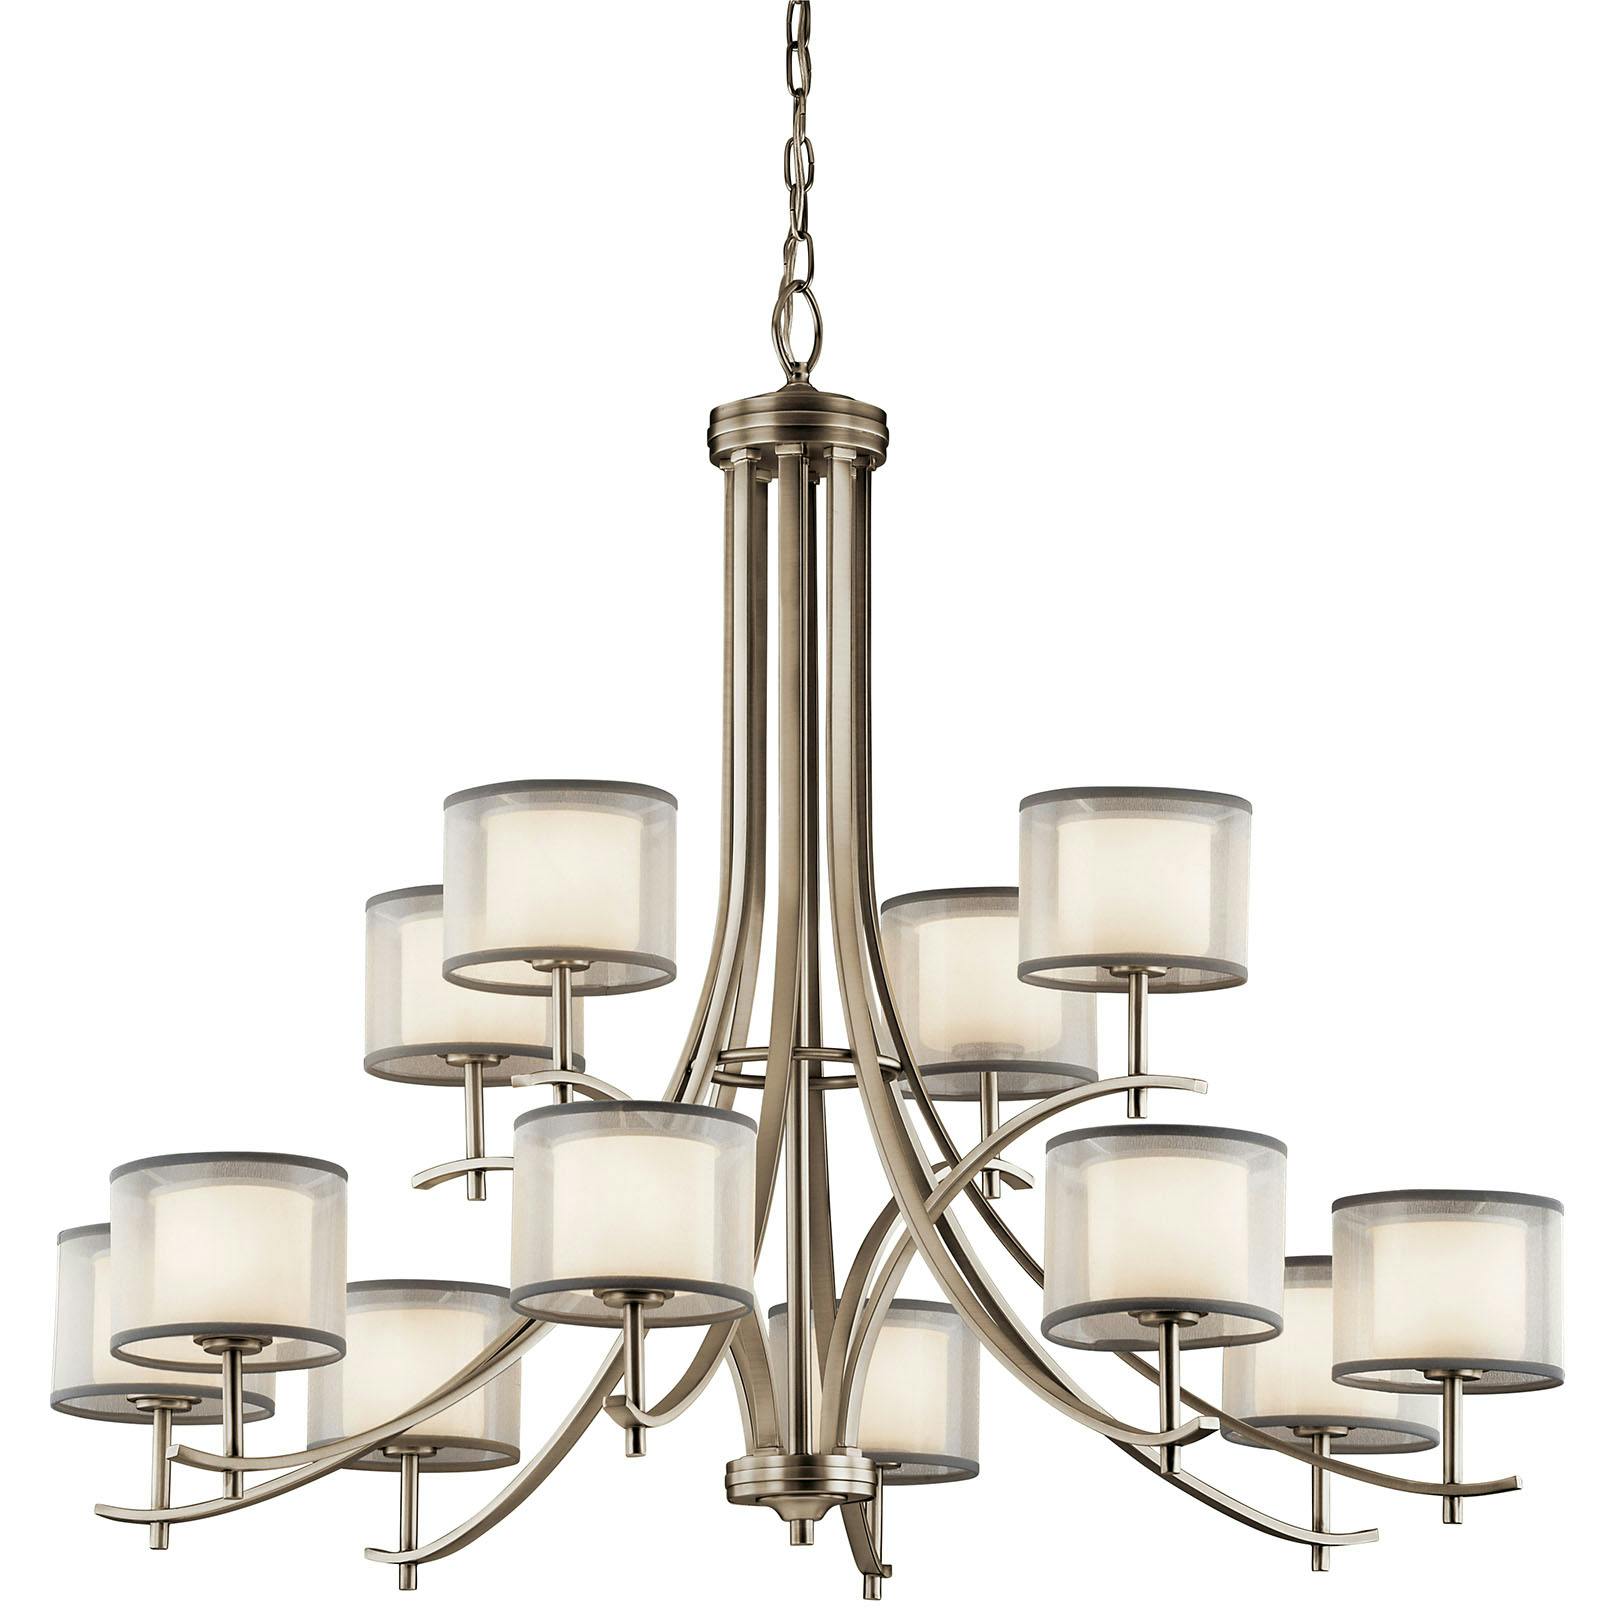 Tallie 12 Light Chandelier Antique Pewter on a white background